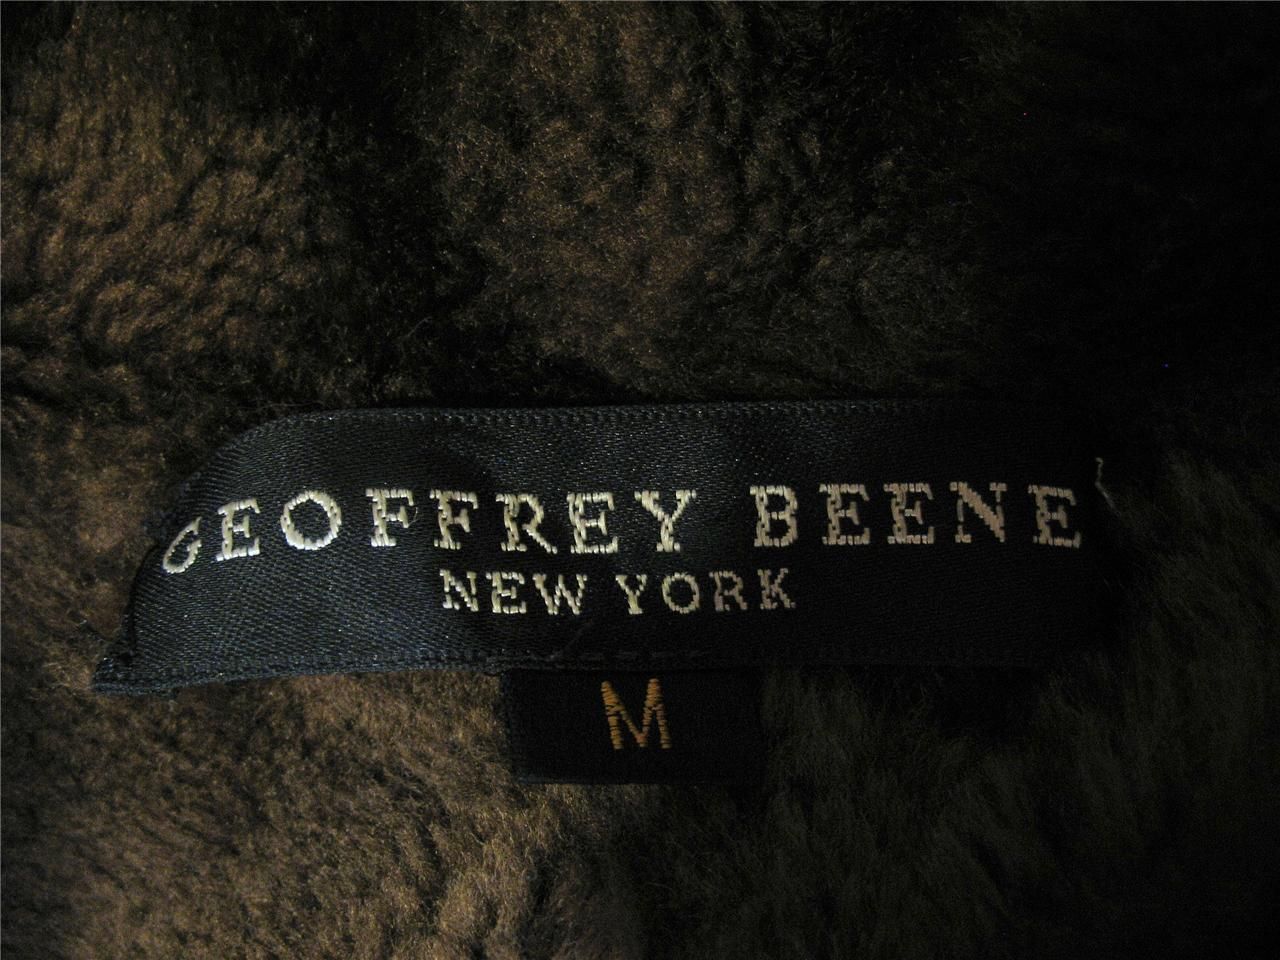 Geoffrey Beene Couture Brown Suede Leather Shearling Lined Heavy